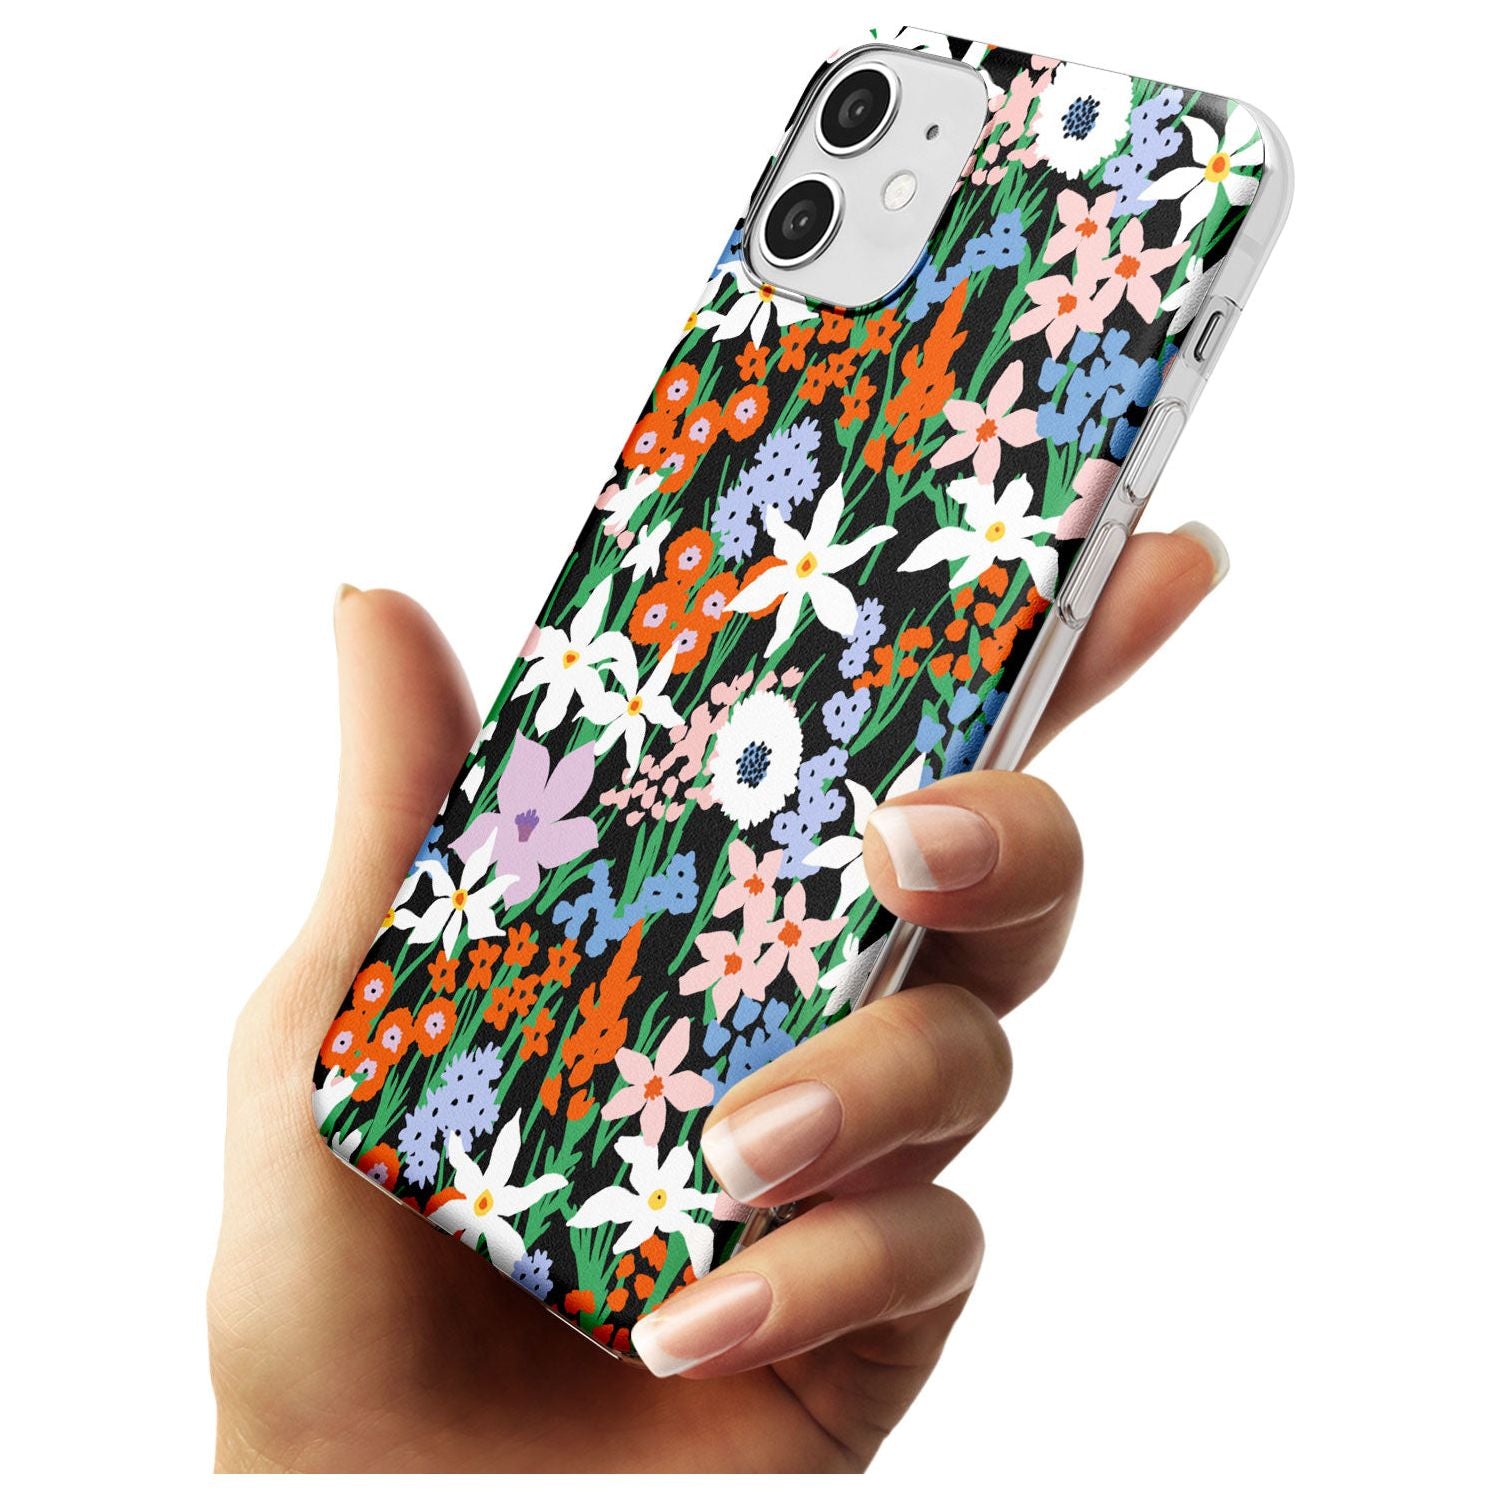 Springtime Meadow: Solid Black Impact Phone Case for iPhone 11